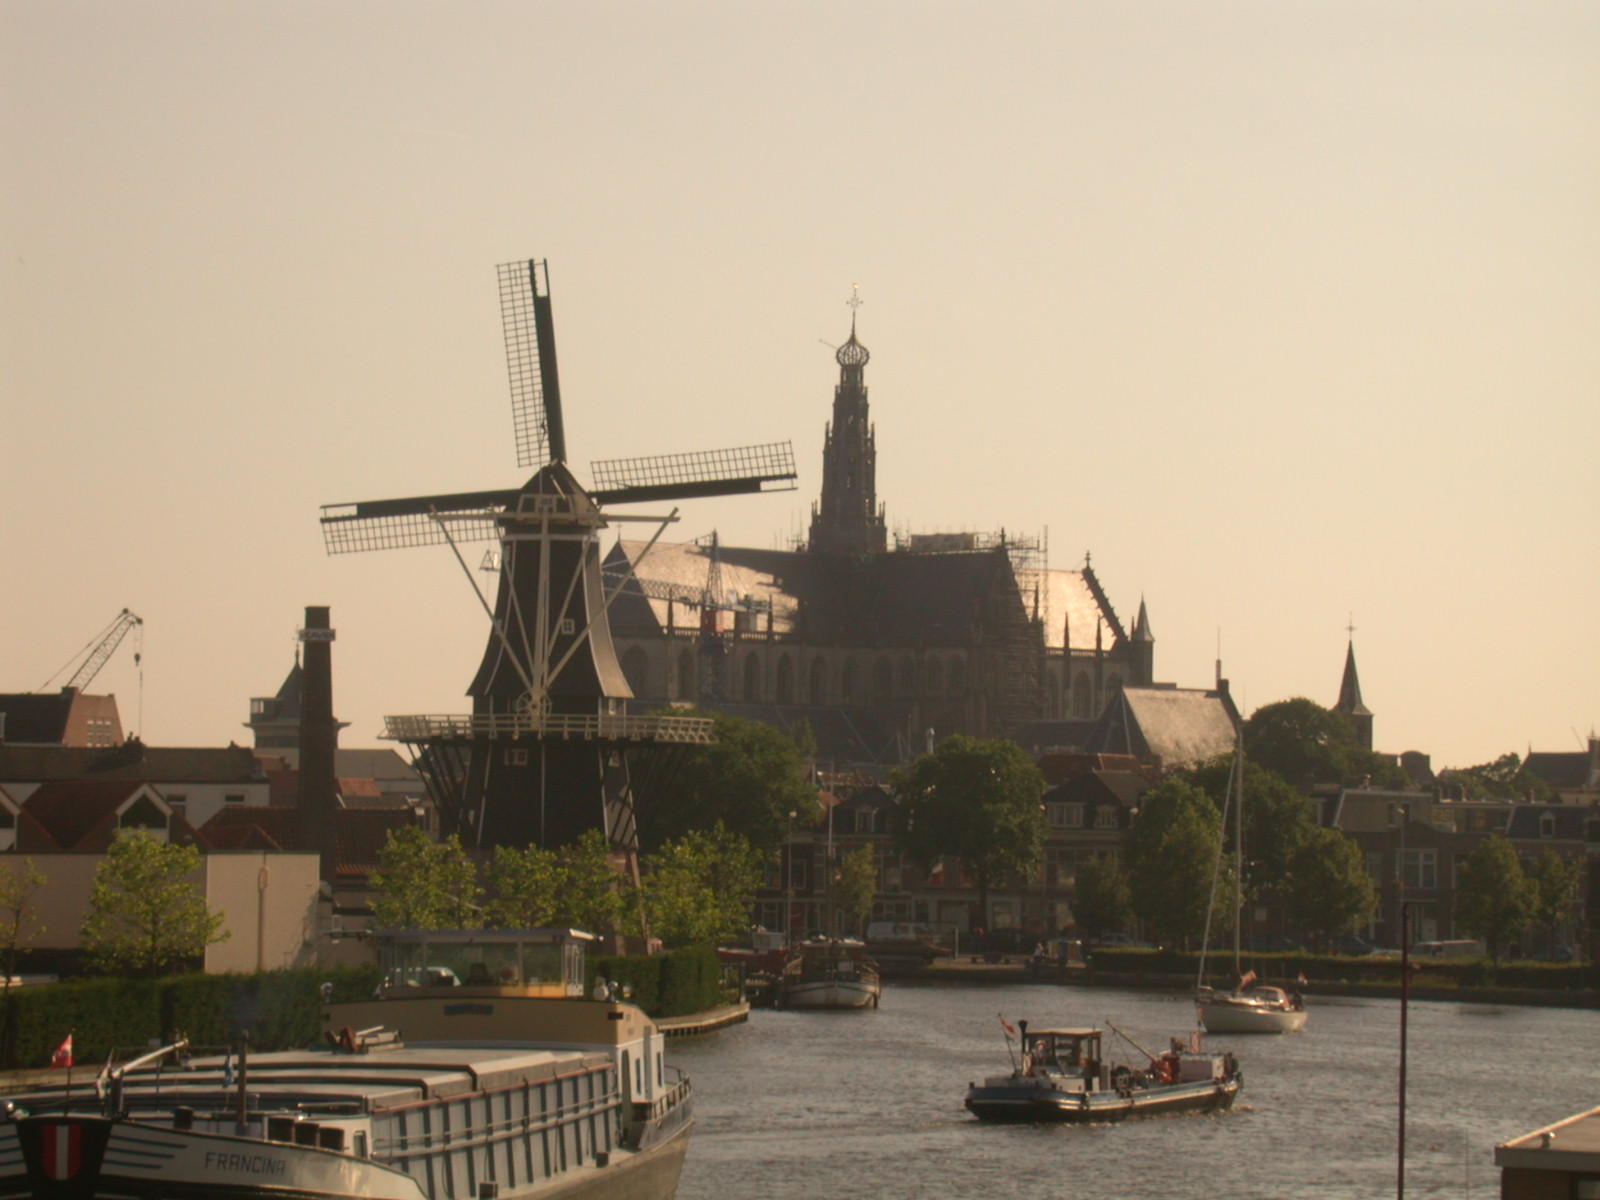 nature landscapes cityscapes haarlem river riverscapes waterscapes traffic boat boats ship architecture exteriors mill windmill cathedral church houses city summer